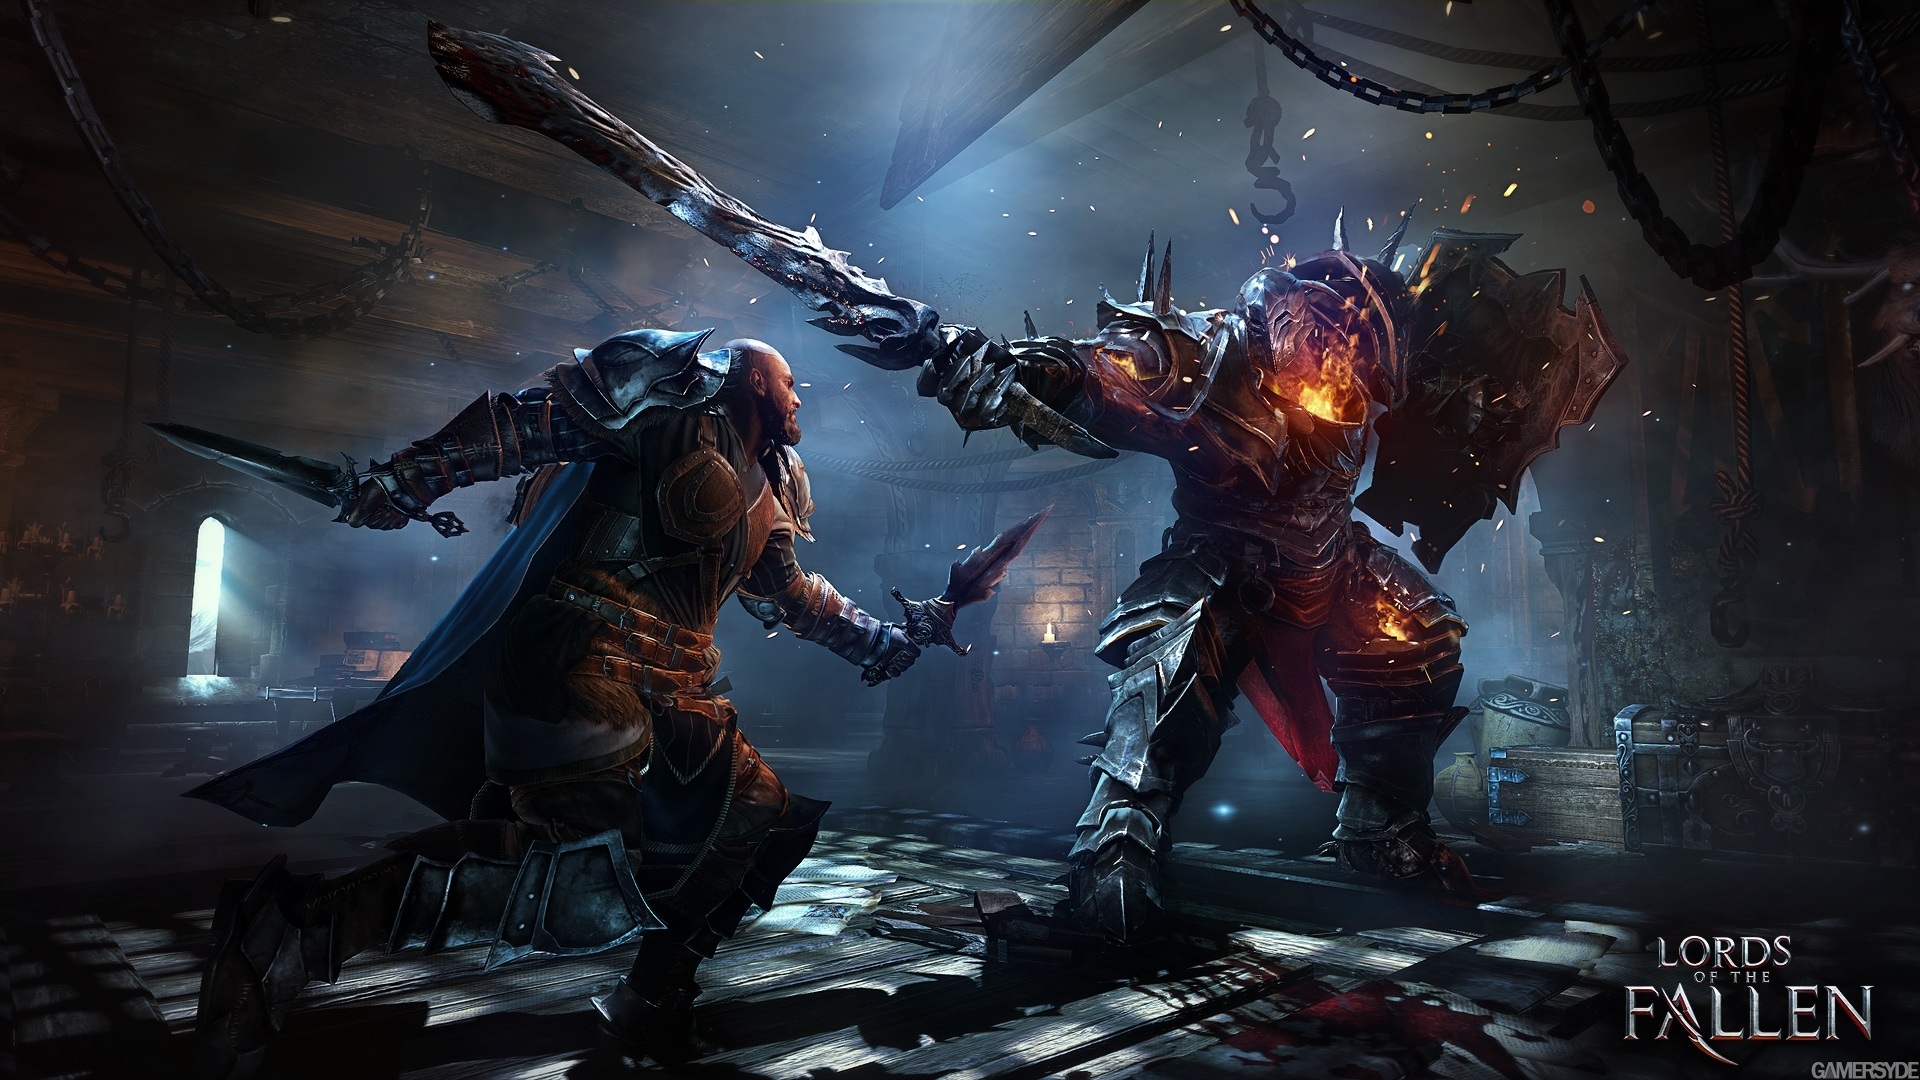 instal the new version for ios Lords of the Fallen